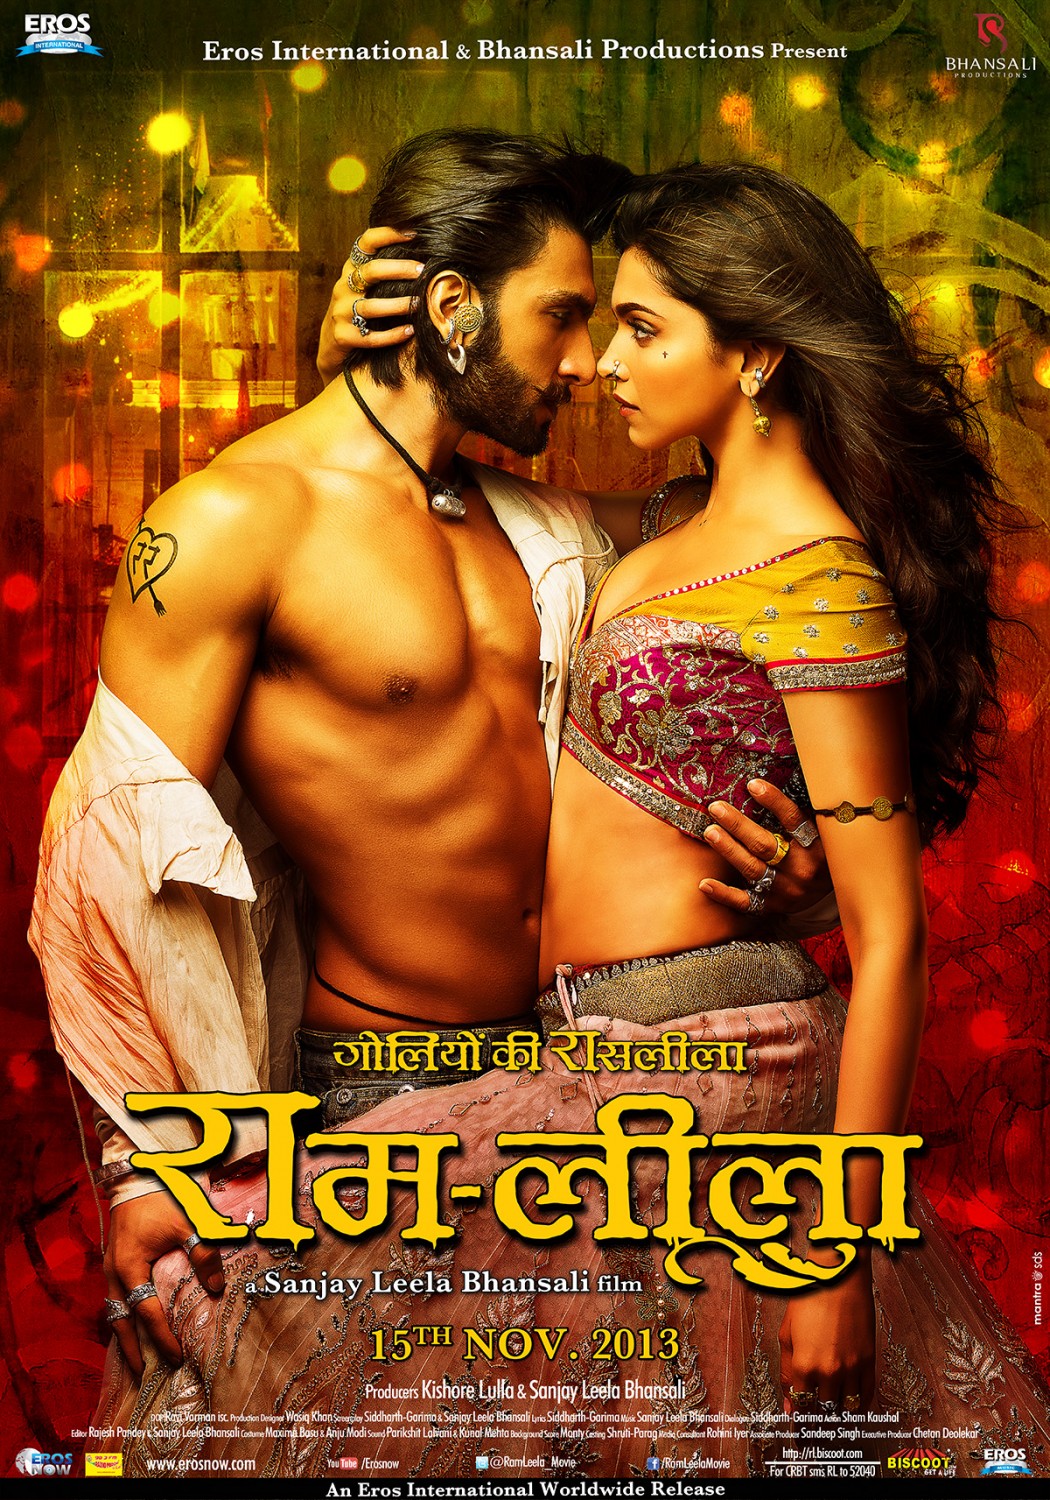 Extra Large Movie Poster Image for Ram Leela (#4 of 4)